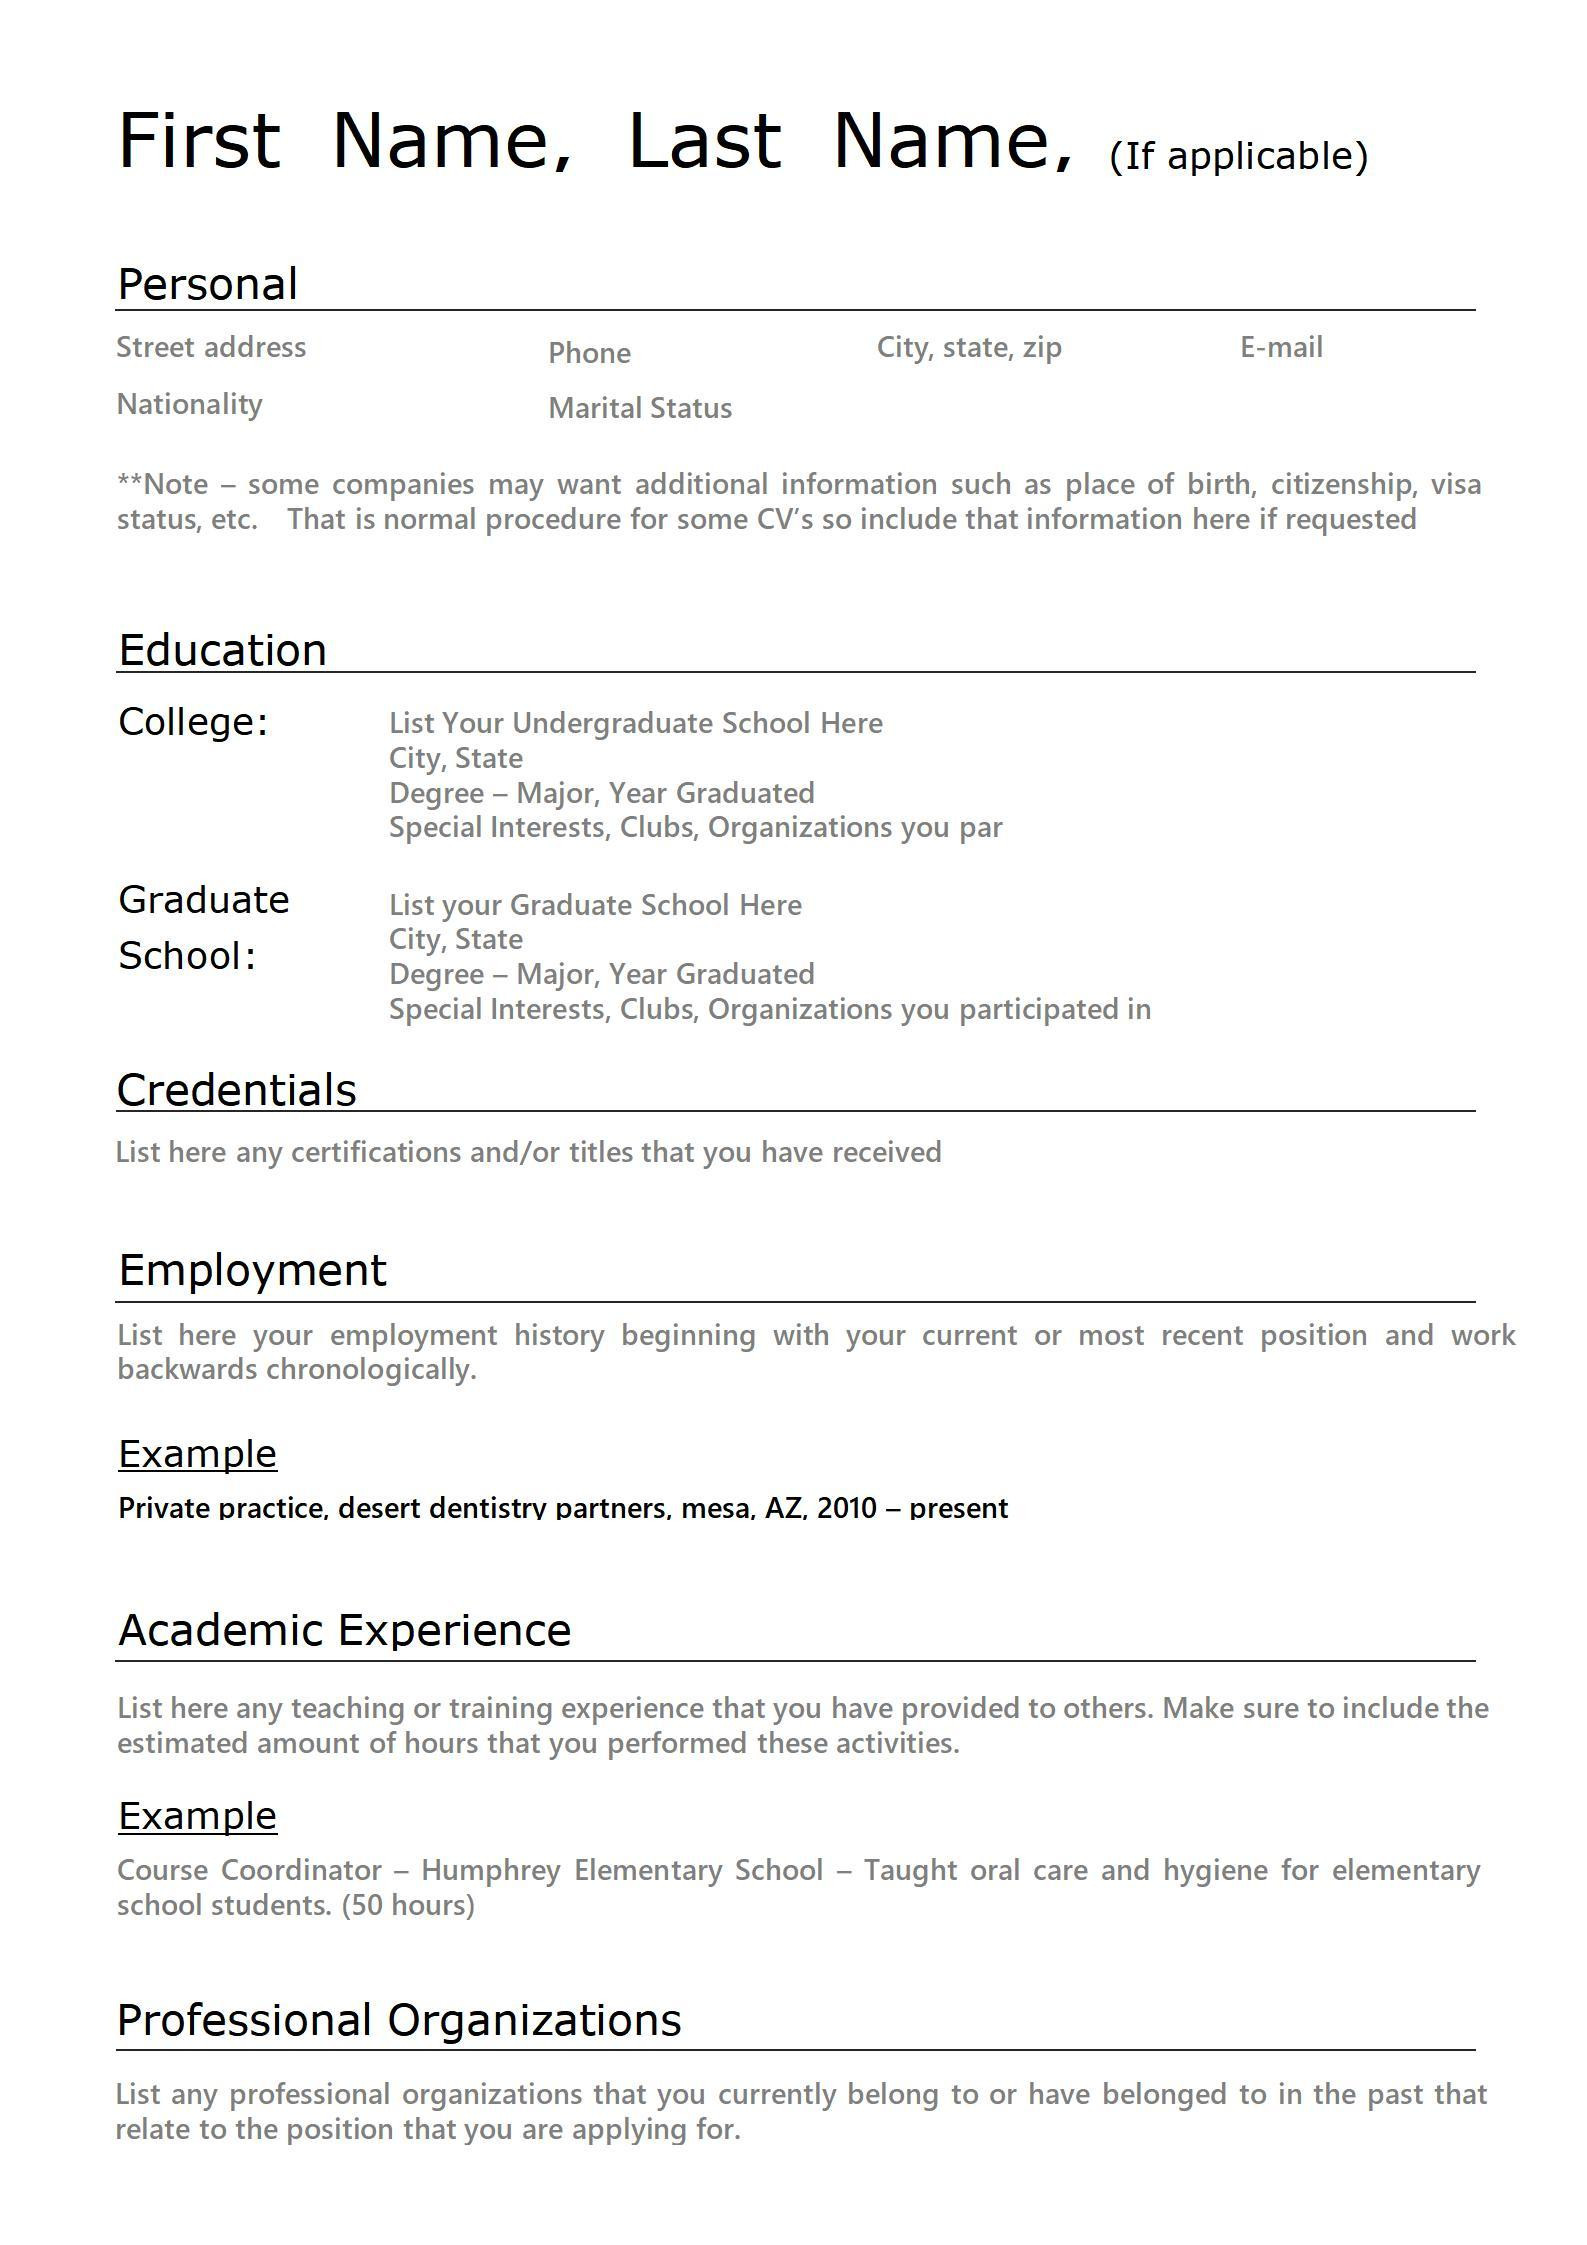 First Job First Time Resume Sample First-time Resume with No Experience Samples Wps Office Academy